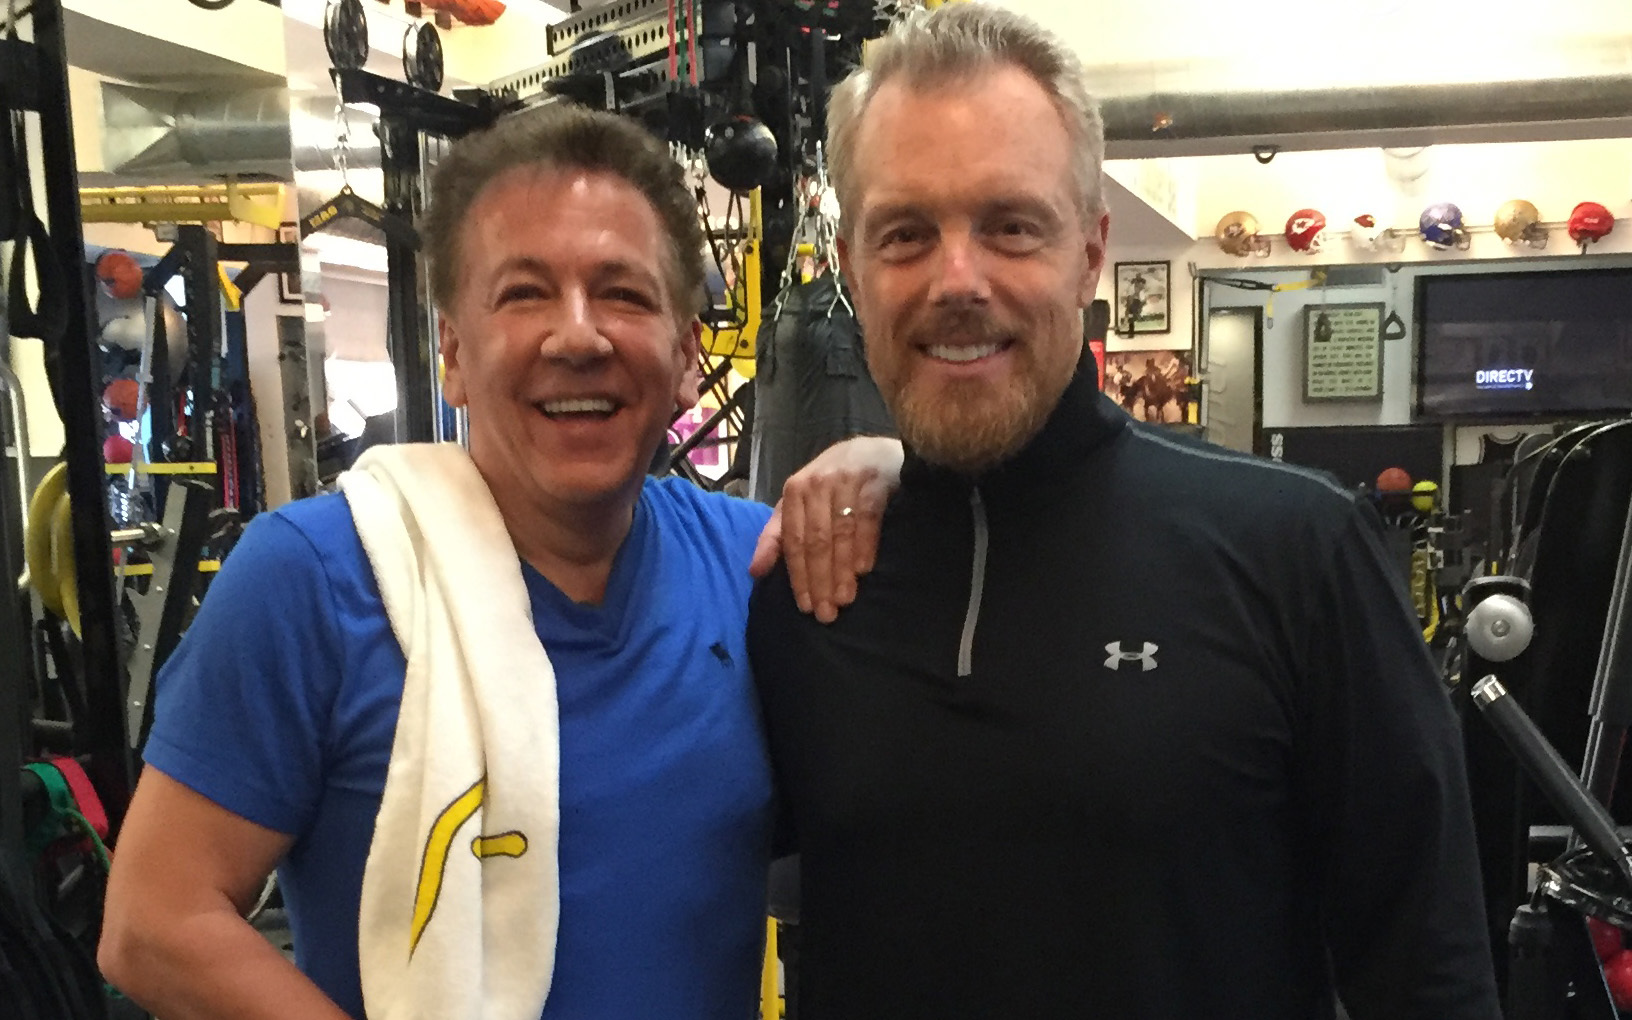 A super-fit friend to Hollywood’s biggest stars... and Ross King!